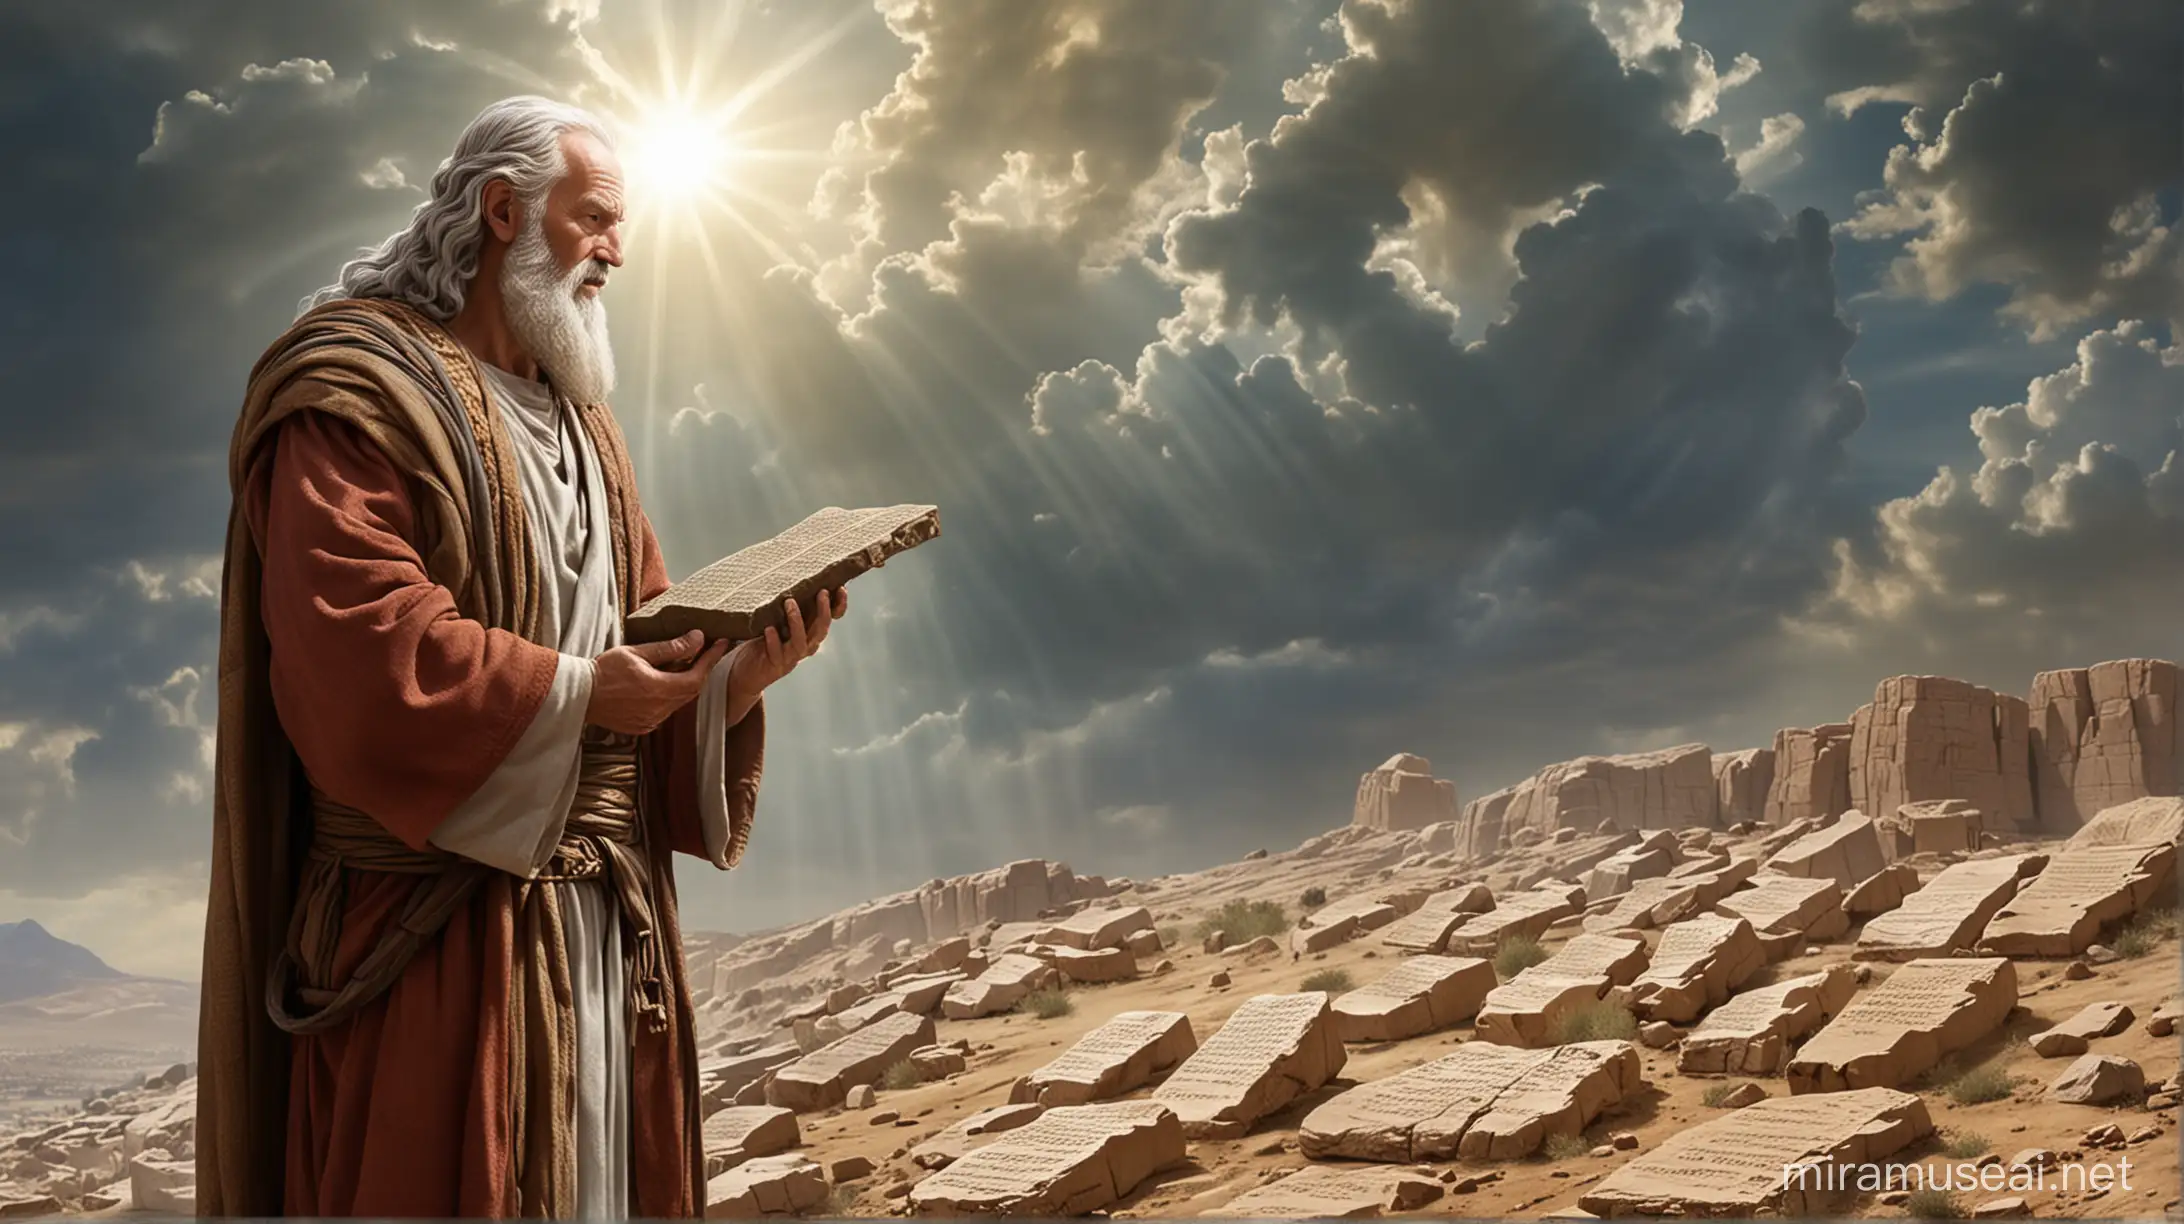 Moses on the mount receiving 2 large stone tablets with the 10 commandments inscribed from God.